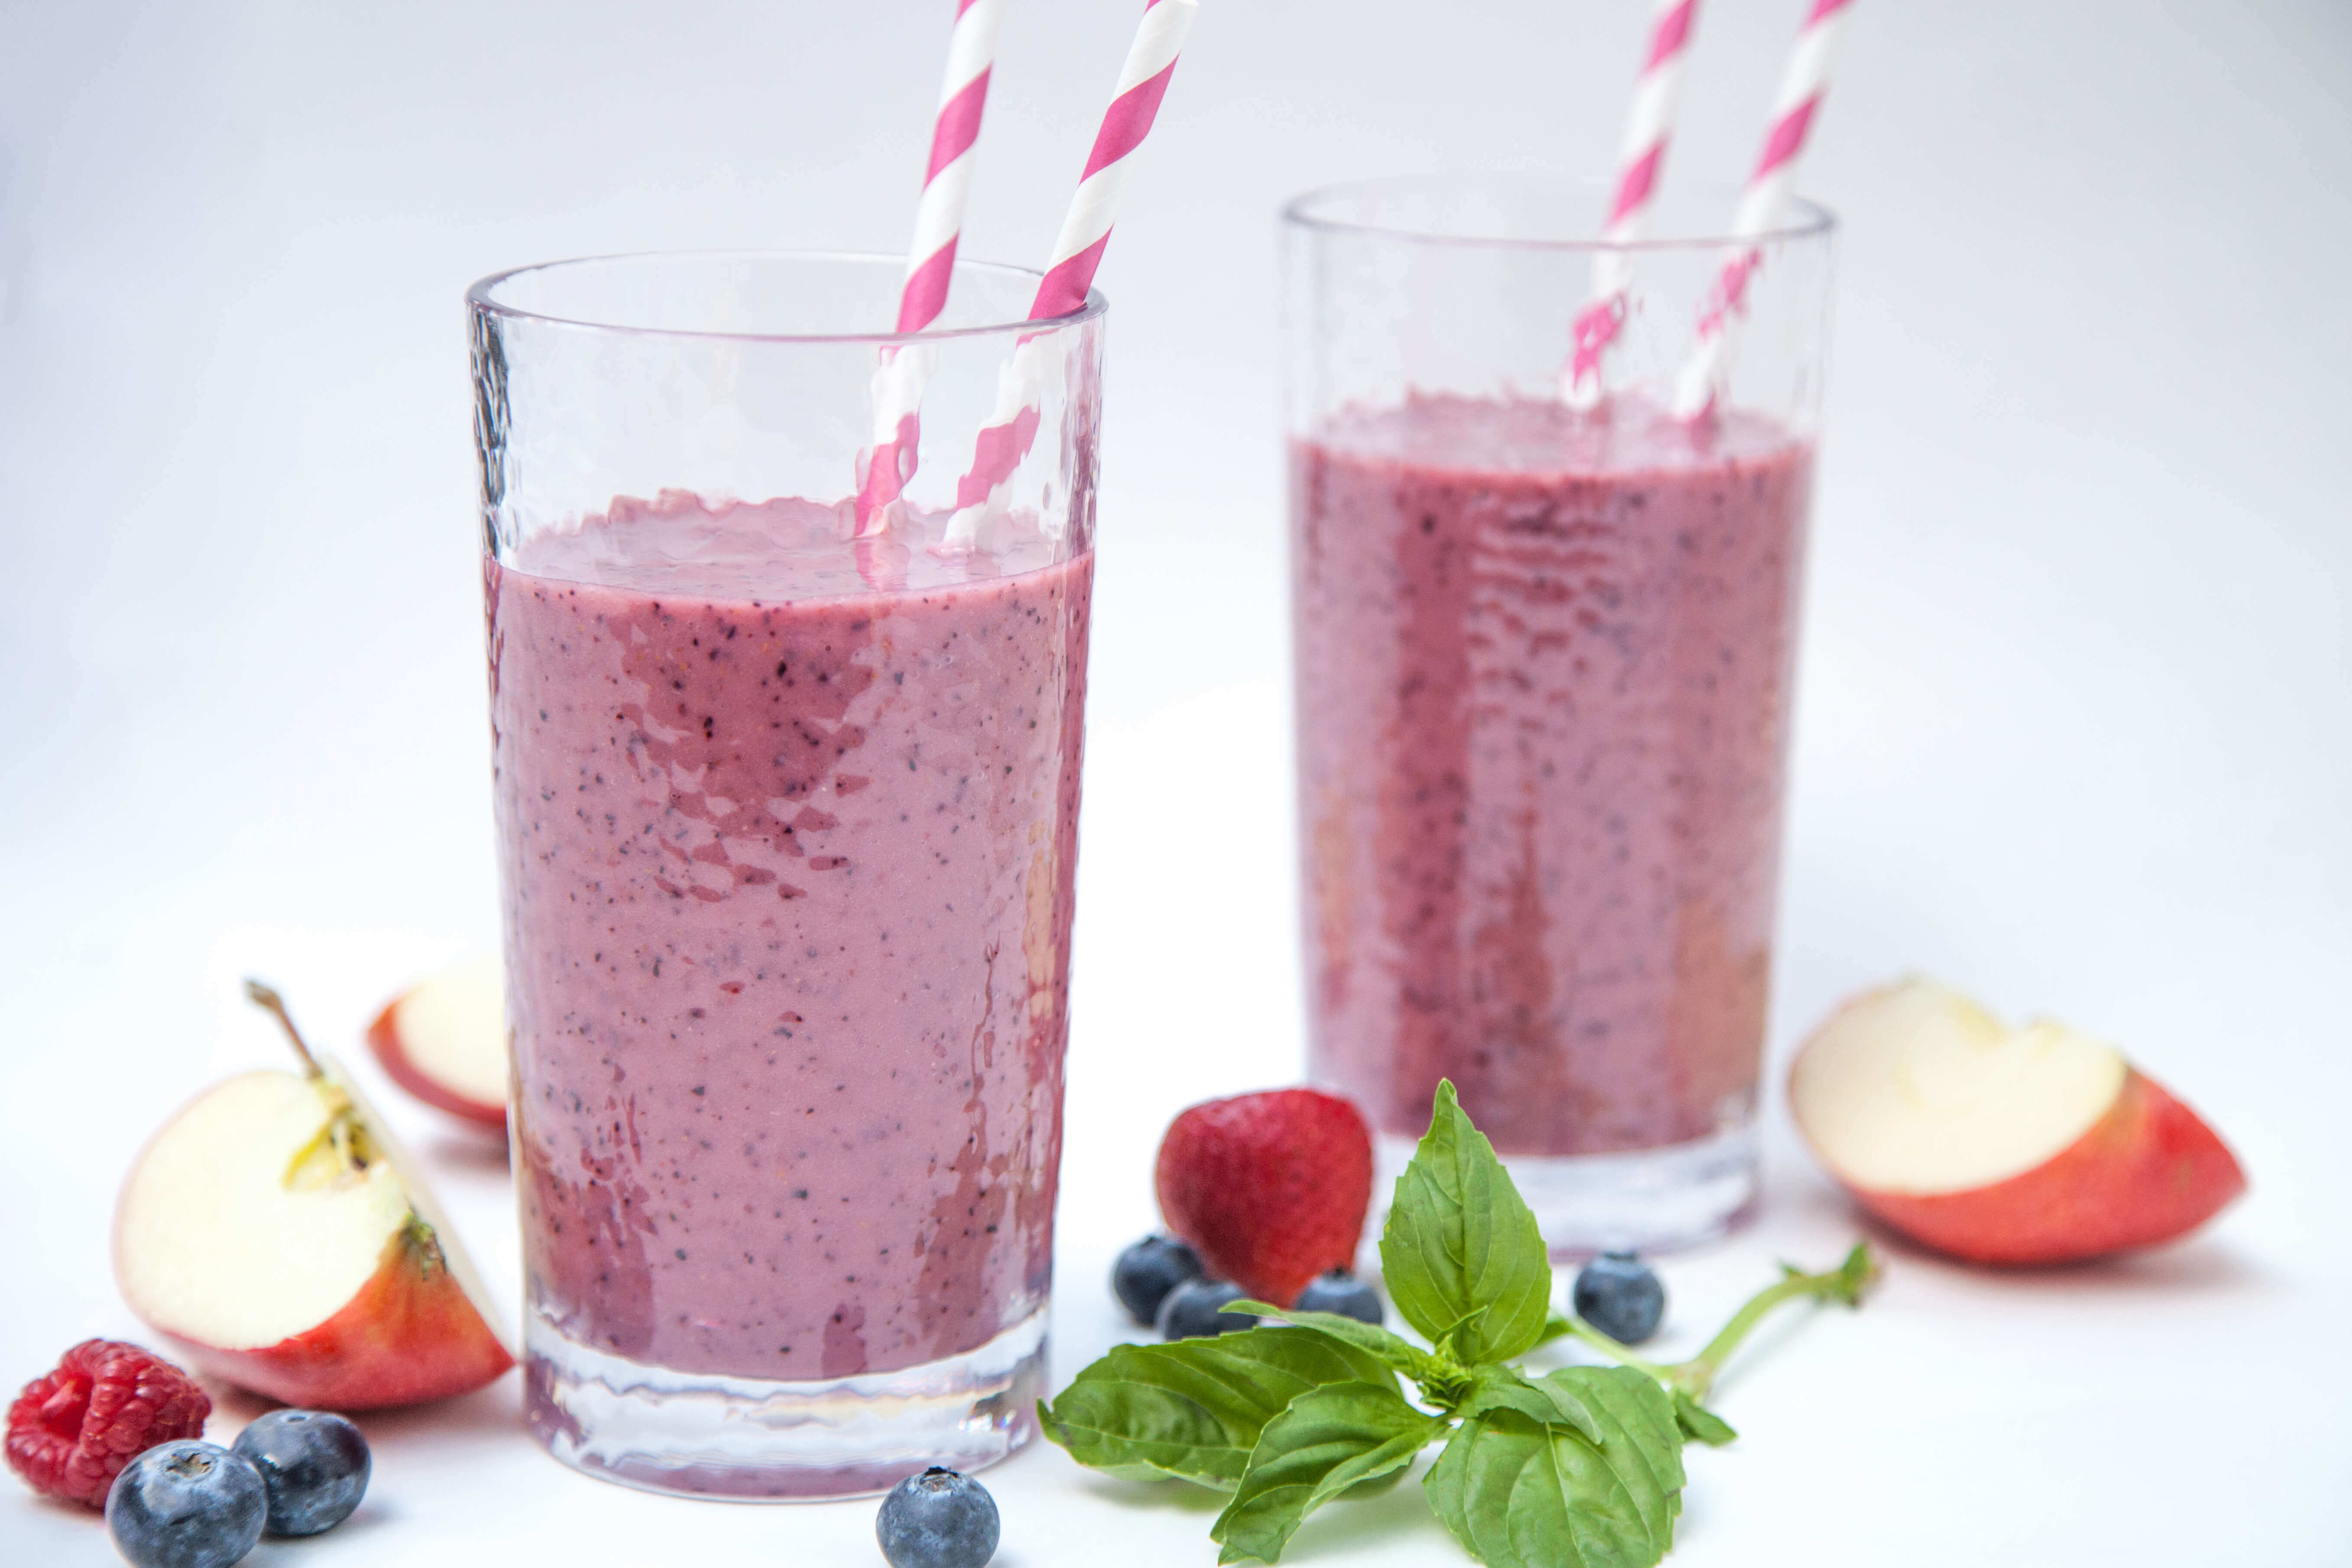 No Dairy-Very Berry Smoothie with Sweet Apples